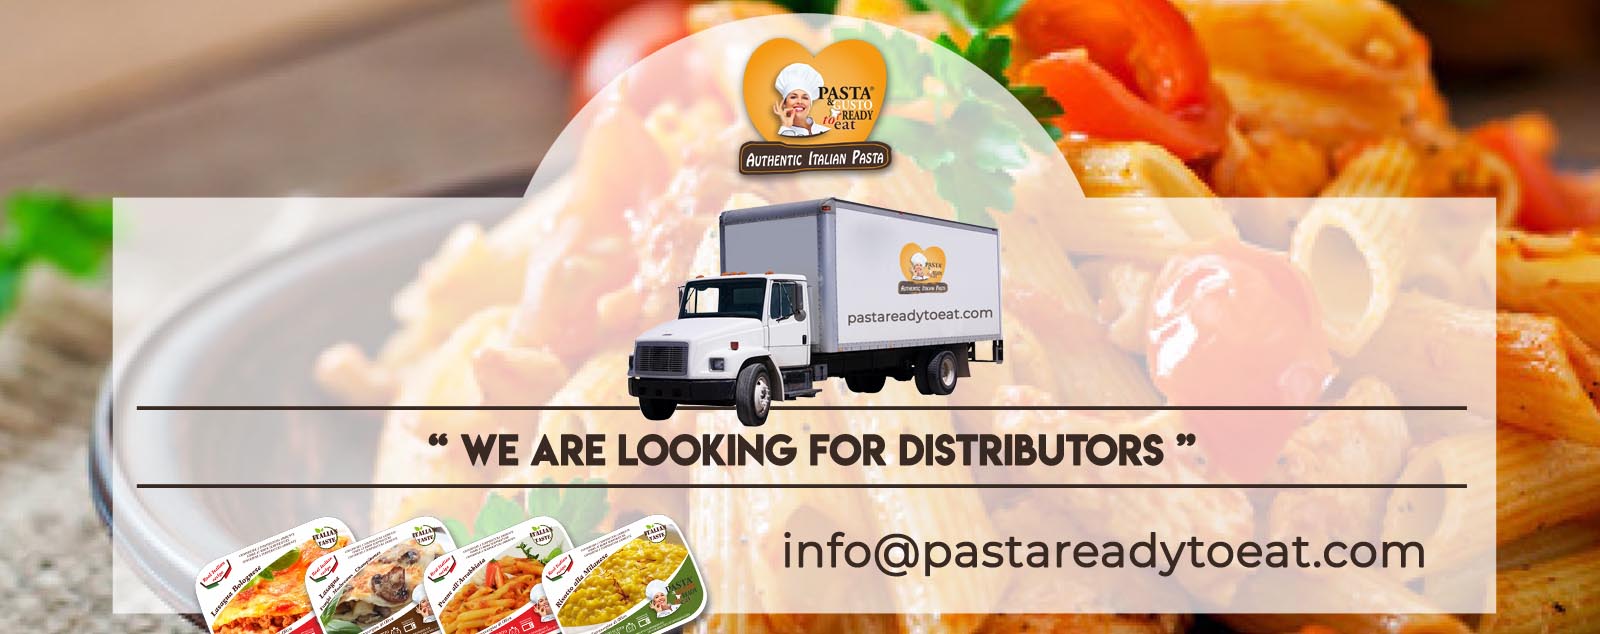 We're looking for distributors of room temperature Pasta Ready to Eat meals room temperature, sale of innovative products: quality guaranteed, support for sales and marketing. Increase your business, becoming an integral part of our structure.